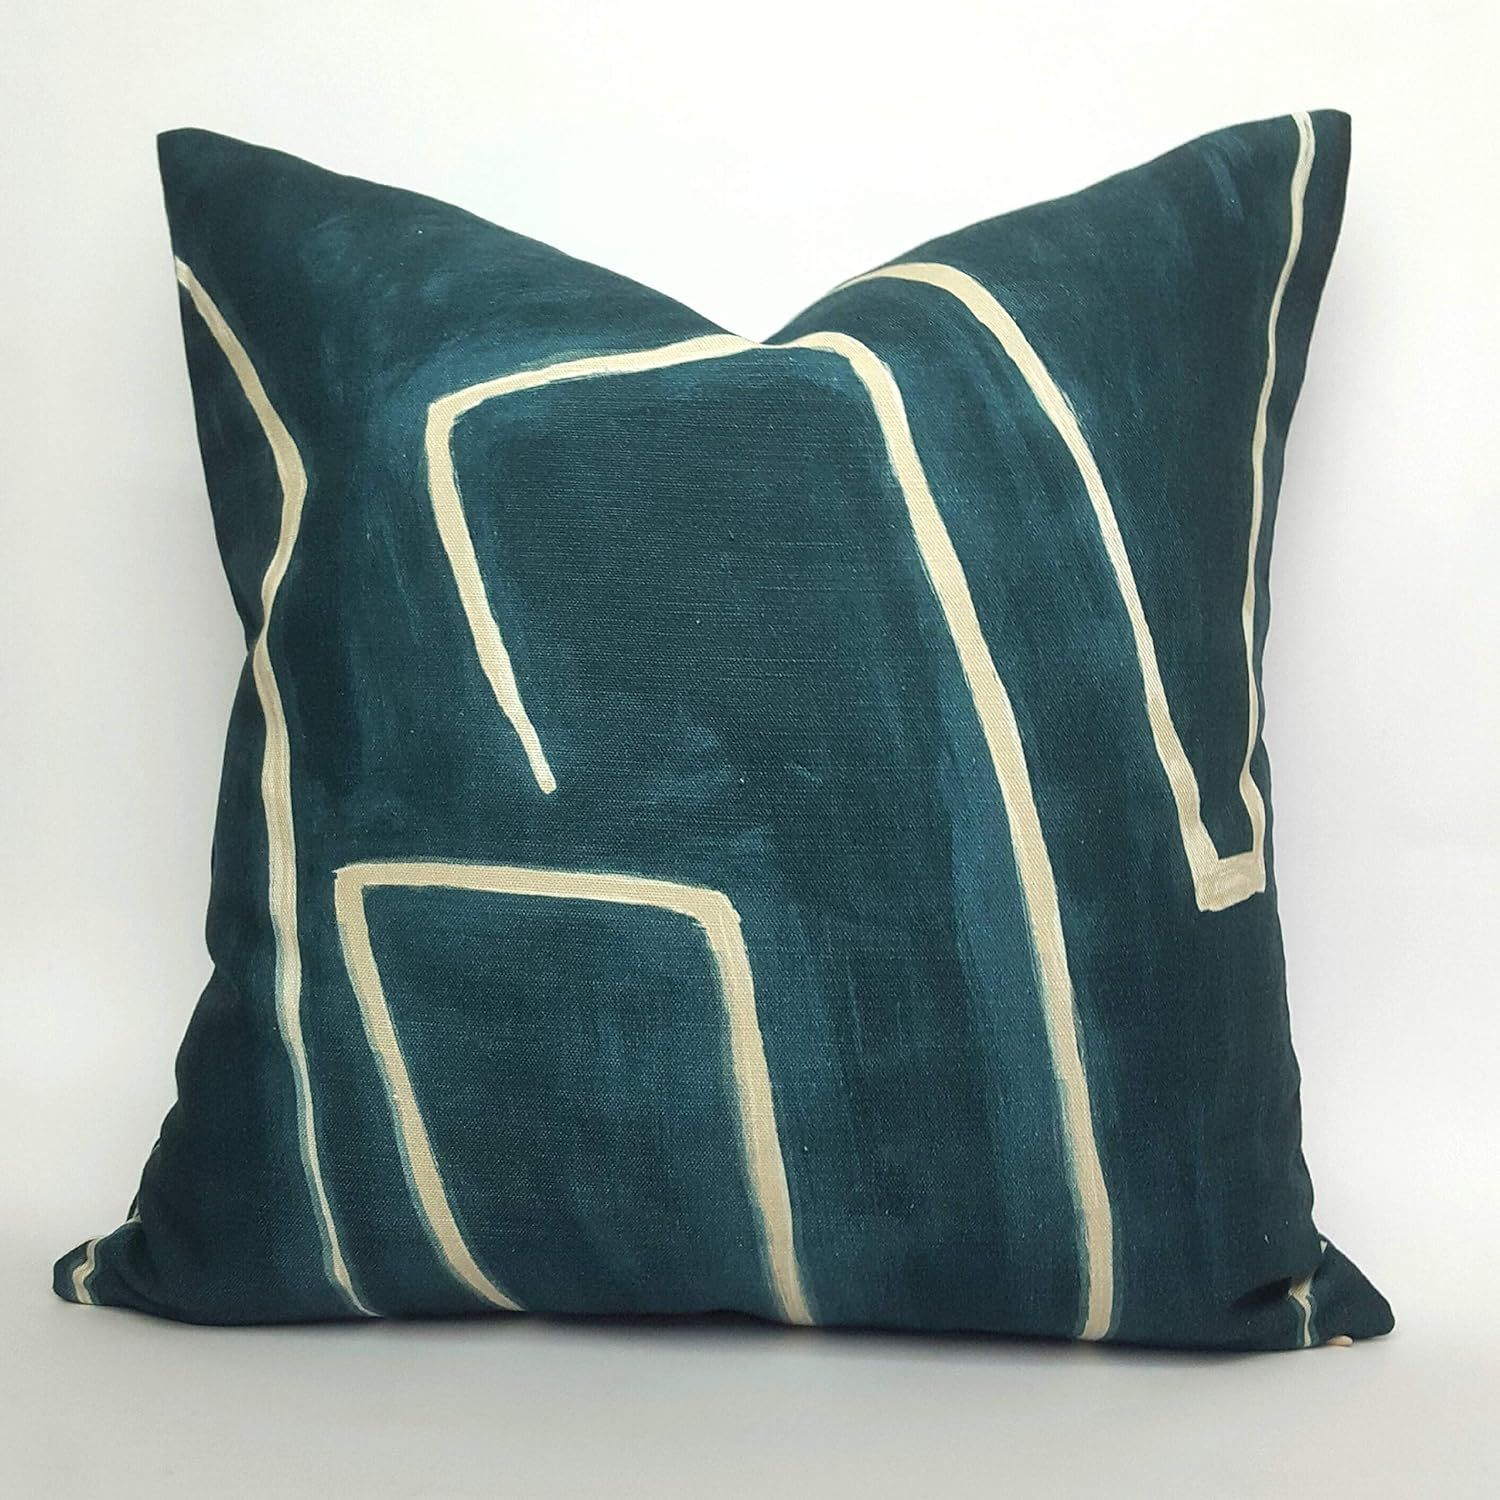 Flowershave357 Kelly Wearstler Graffito Pillow Cover in Teal Throw Pillow Cover Pillows Decorativ... | Amazon (US)